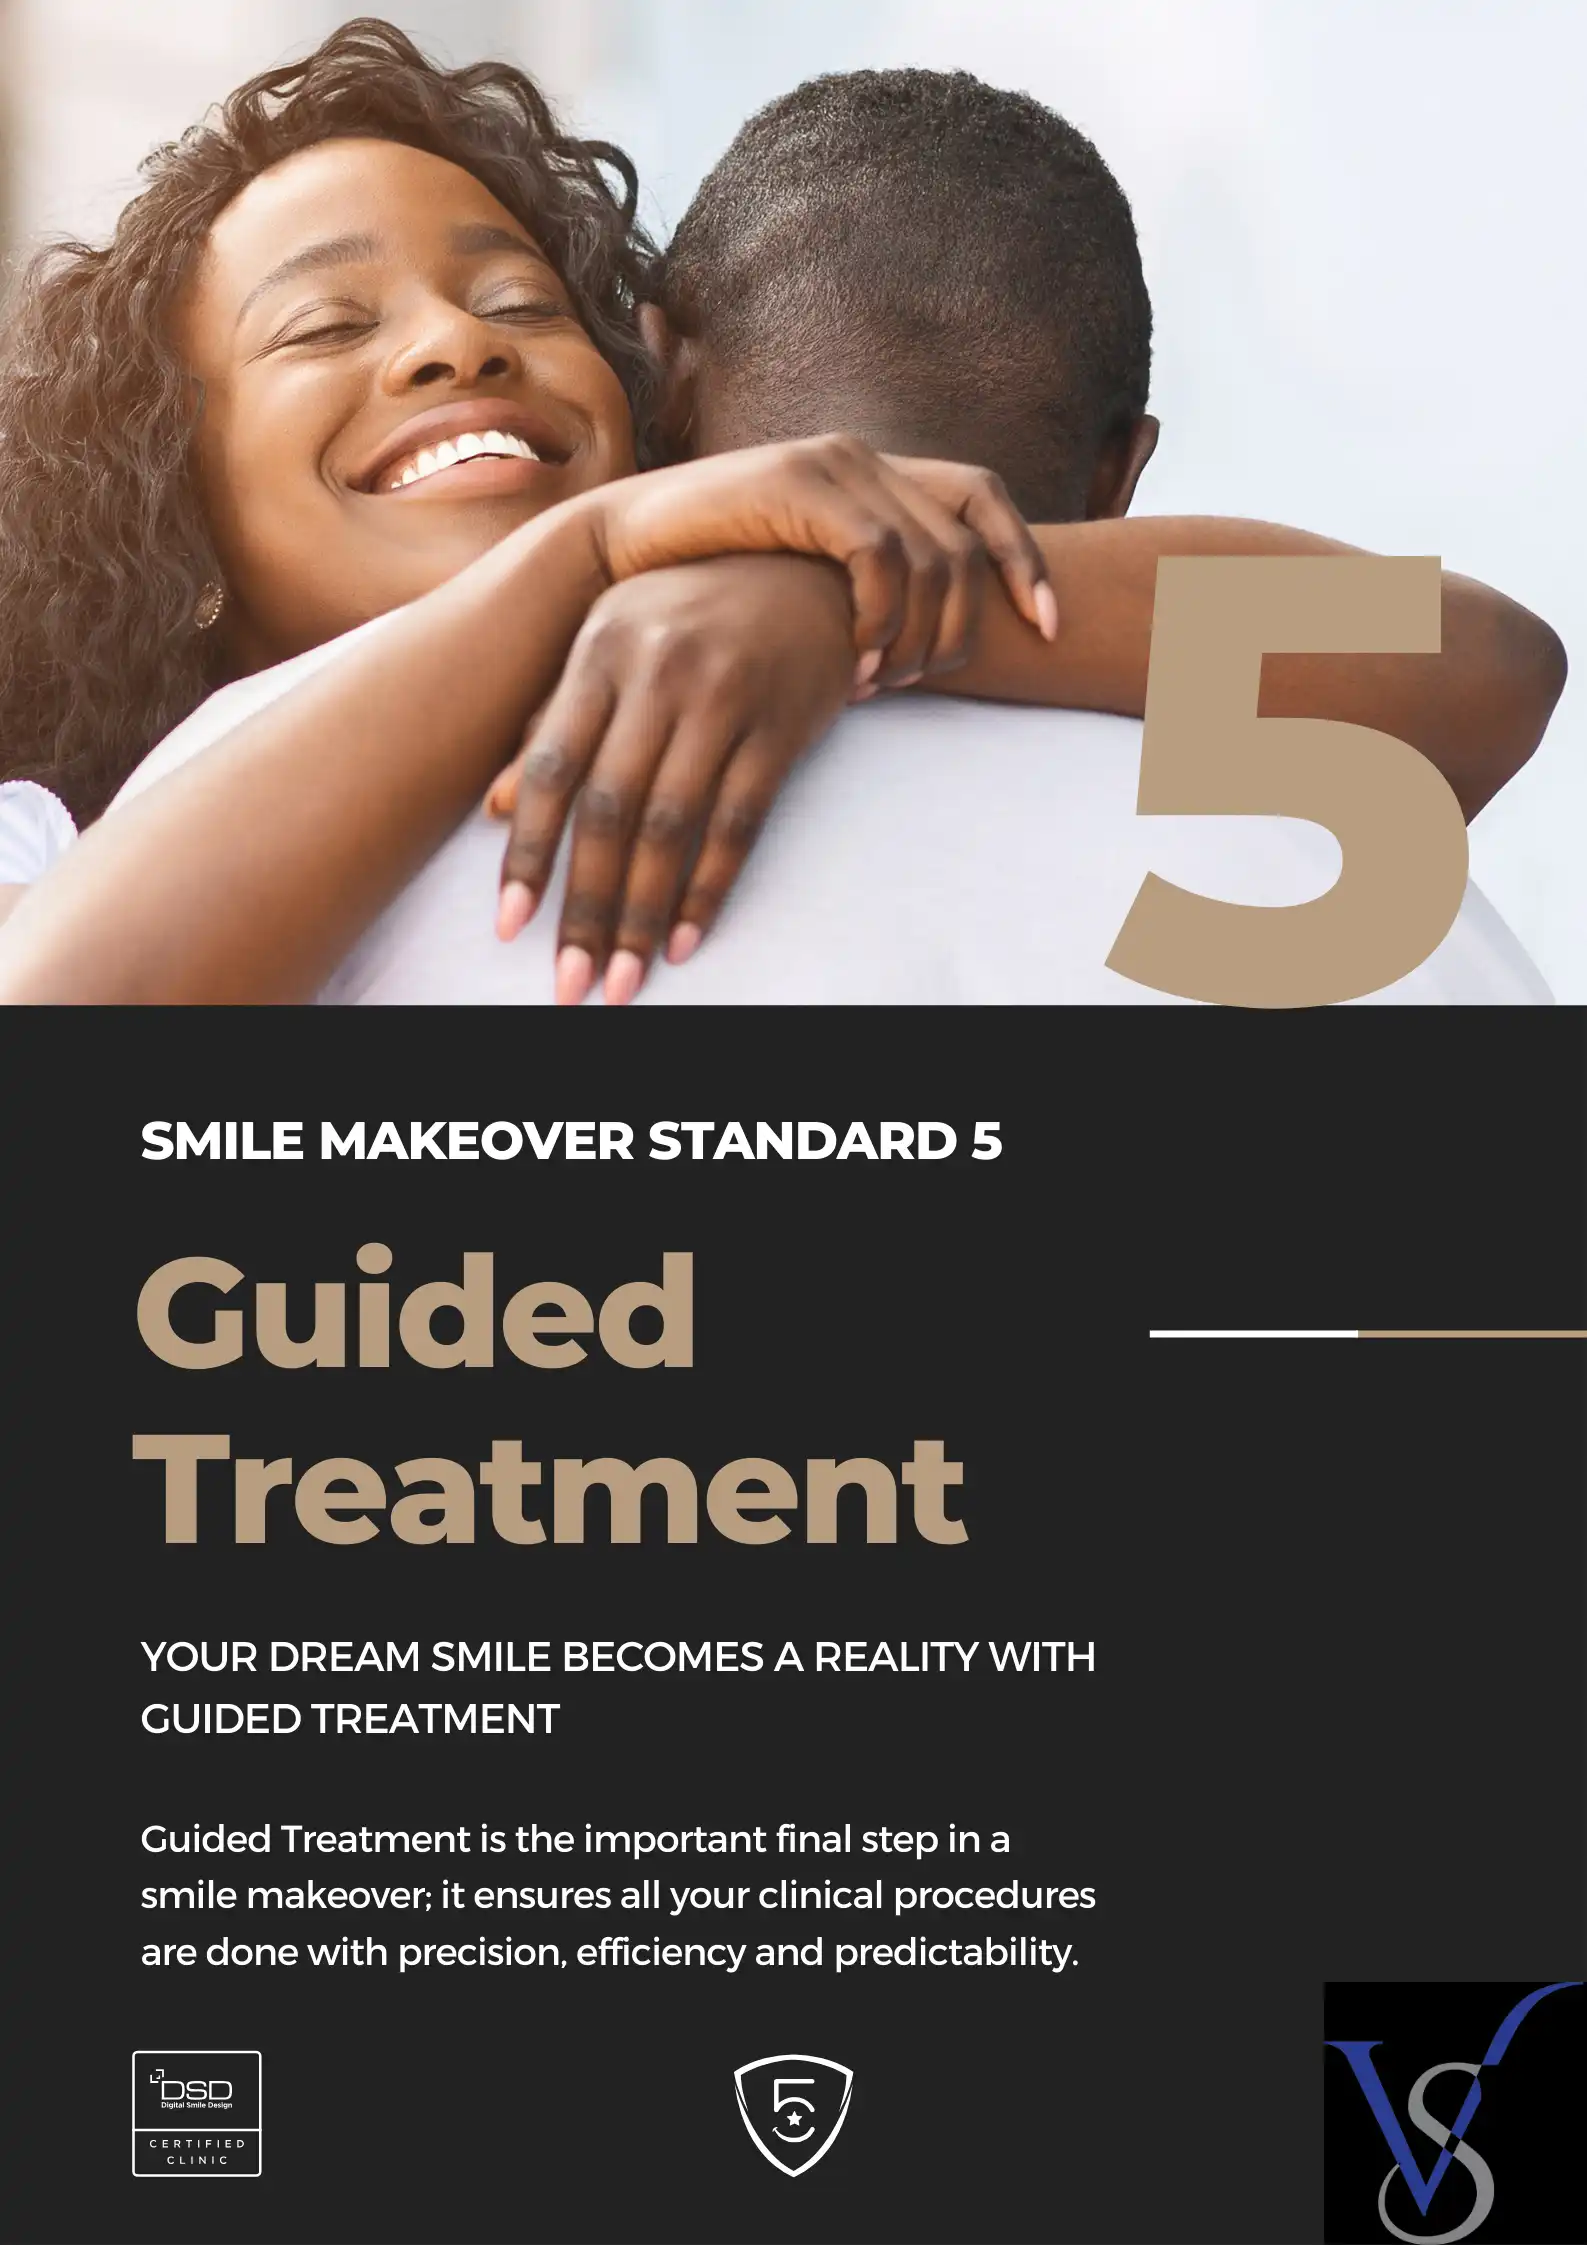 SMILE MAKEOVER STANDARD 5: YOUR DREAM SMILE BECOMES A REALITY WITH CURATED TREATMENT Guided Treatment is the important final step in a smile makeover. It ensures all your clinical procedures are done with precision, efficiency, and predictability.